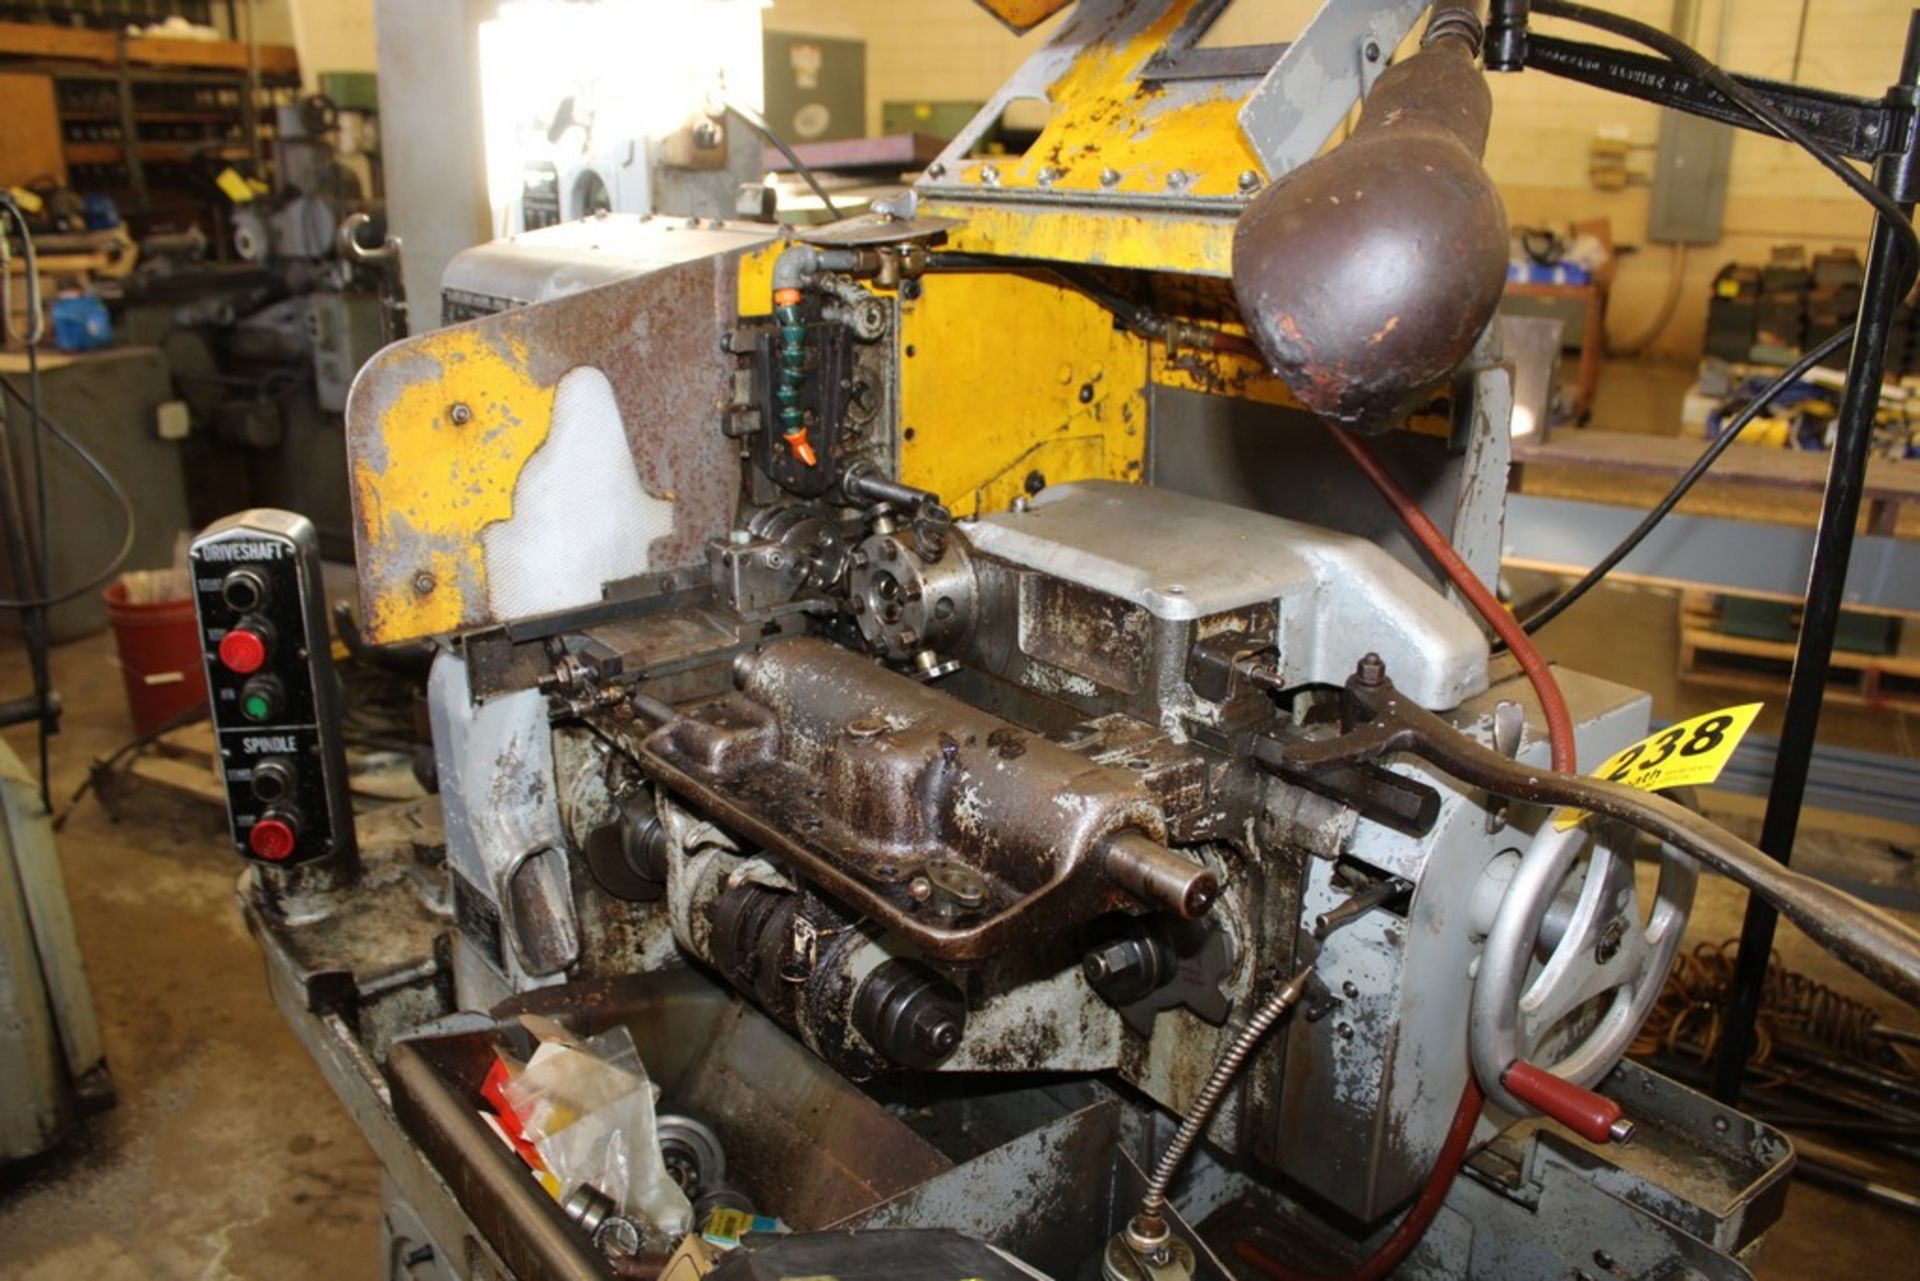 BROWN & SHARPE 1/2" NO. 00 PUSH BUTTON AUTOMATIC SCREW MACHINE, S/N 542-00-6489, WITH VERTICAL - Image 4 of 4